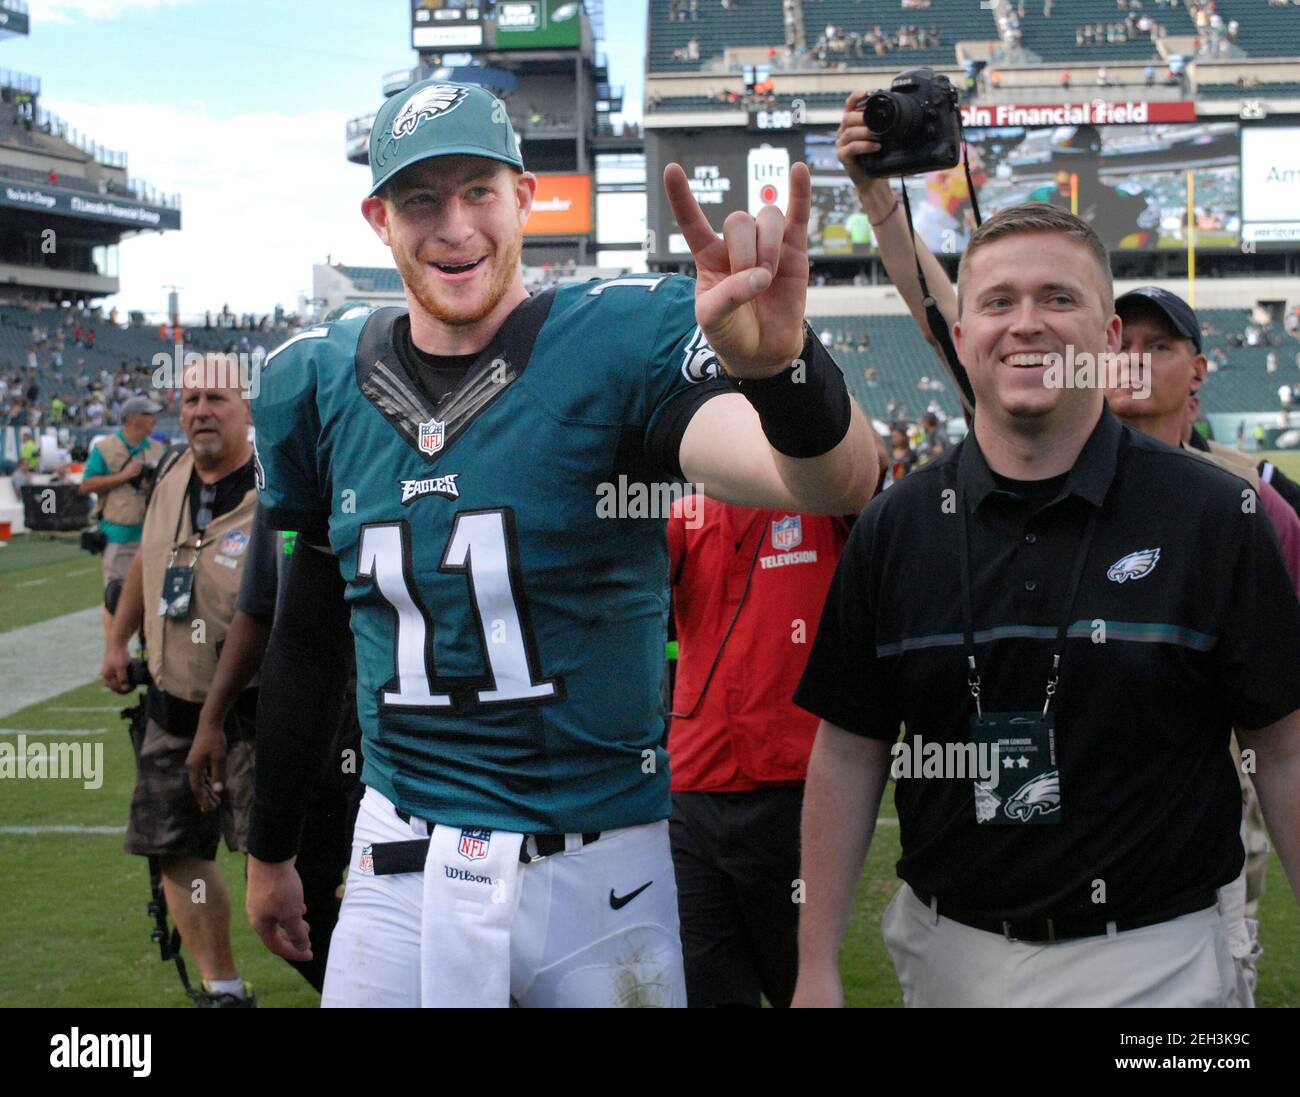 Philadelphia, United States. 11th Sep, 2016. FILE PHOTO: In this September 11, 2016 file photo, Philadelphia Eagles quarterback Carson Wentz #11 walks off the field after defeating the Cleveland Browns Sunday, September 11, 2016 at Lincoln Financial Field in Philadelphia, Pennsylvania. Wentz was traded February 18, 2021, for a second and third round draft pick, to the Indianapolis Colts, reuniting him with Colts head coach and former Philadelphia Eagles offensive coordinator, Frank Reich. ( Credit: William Thomas Cain/Alamy Live News Stock Photo